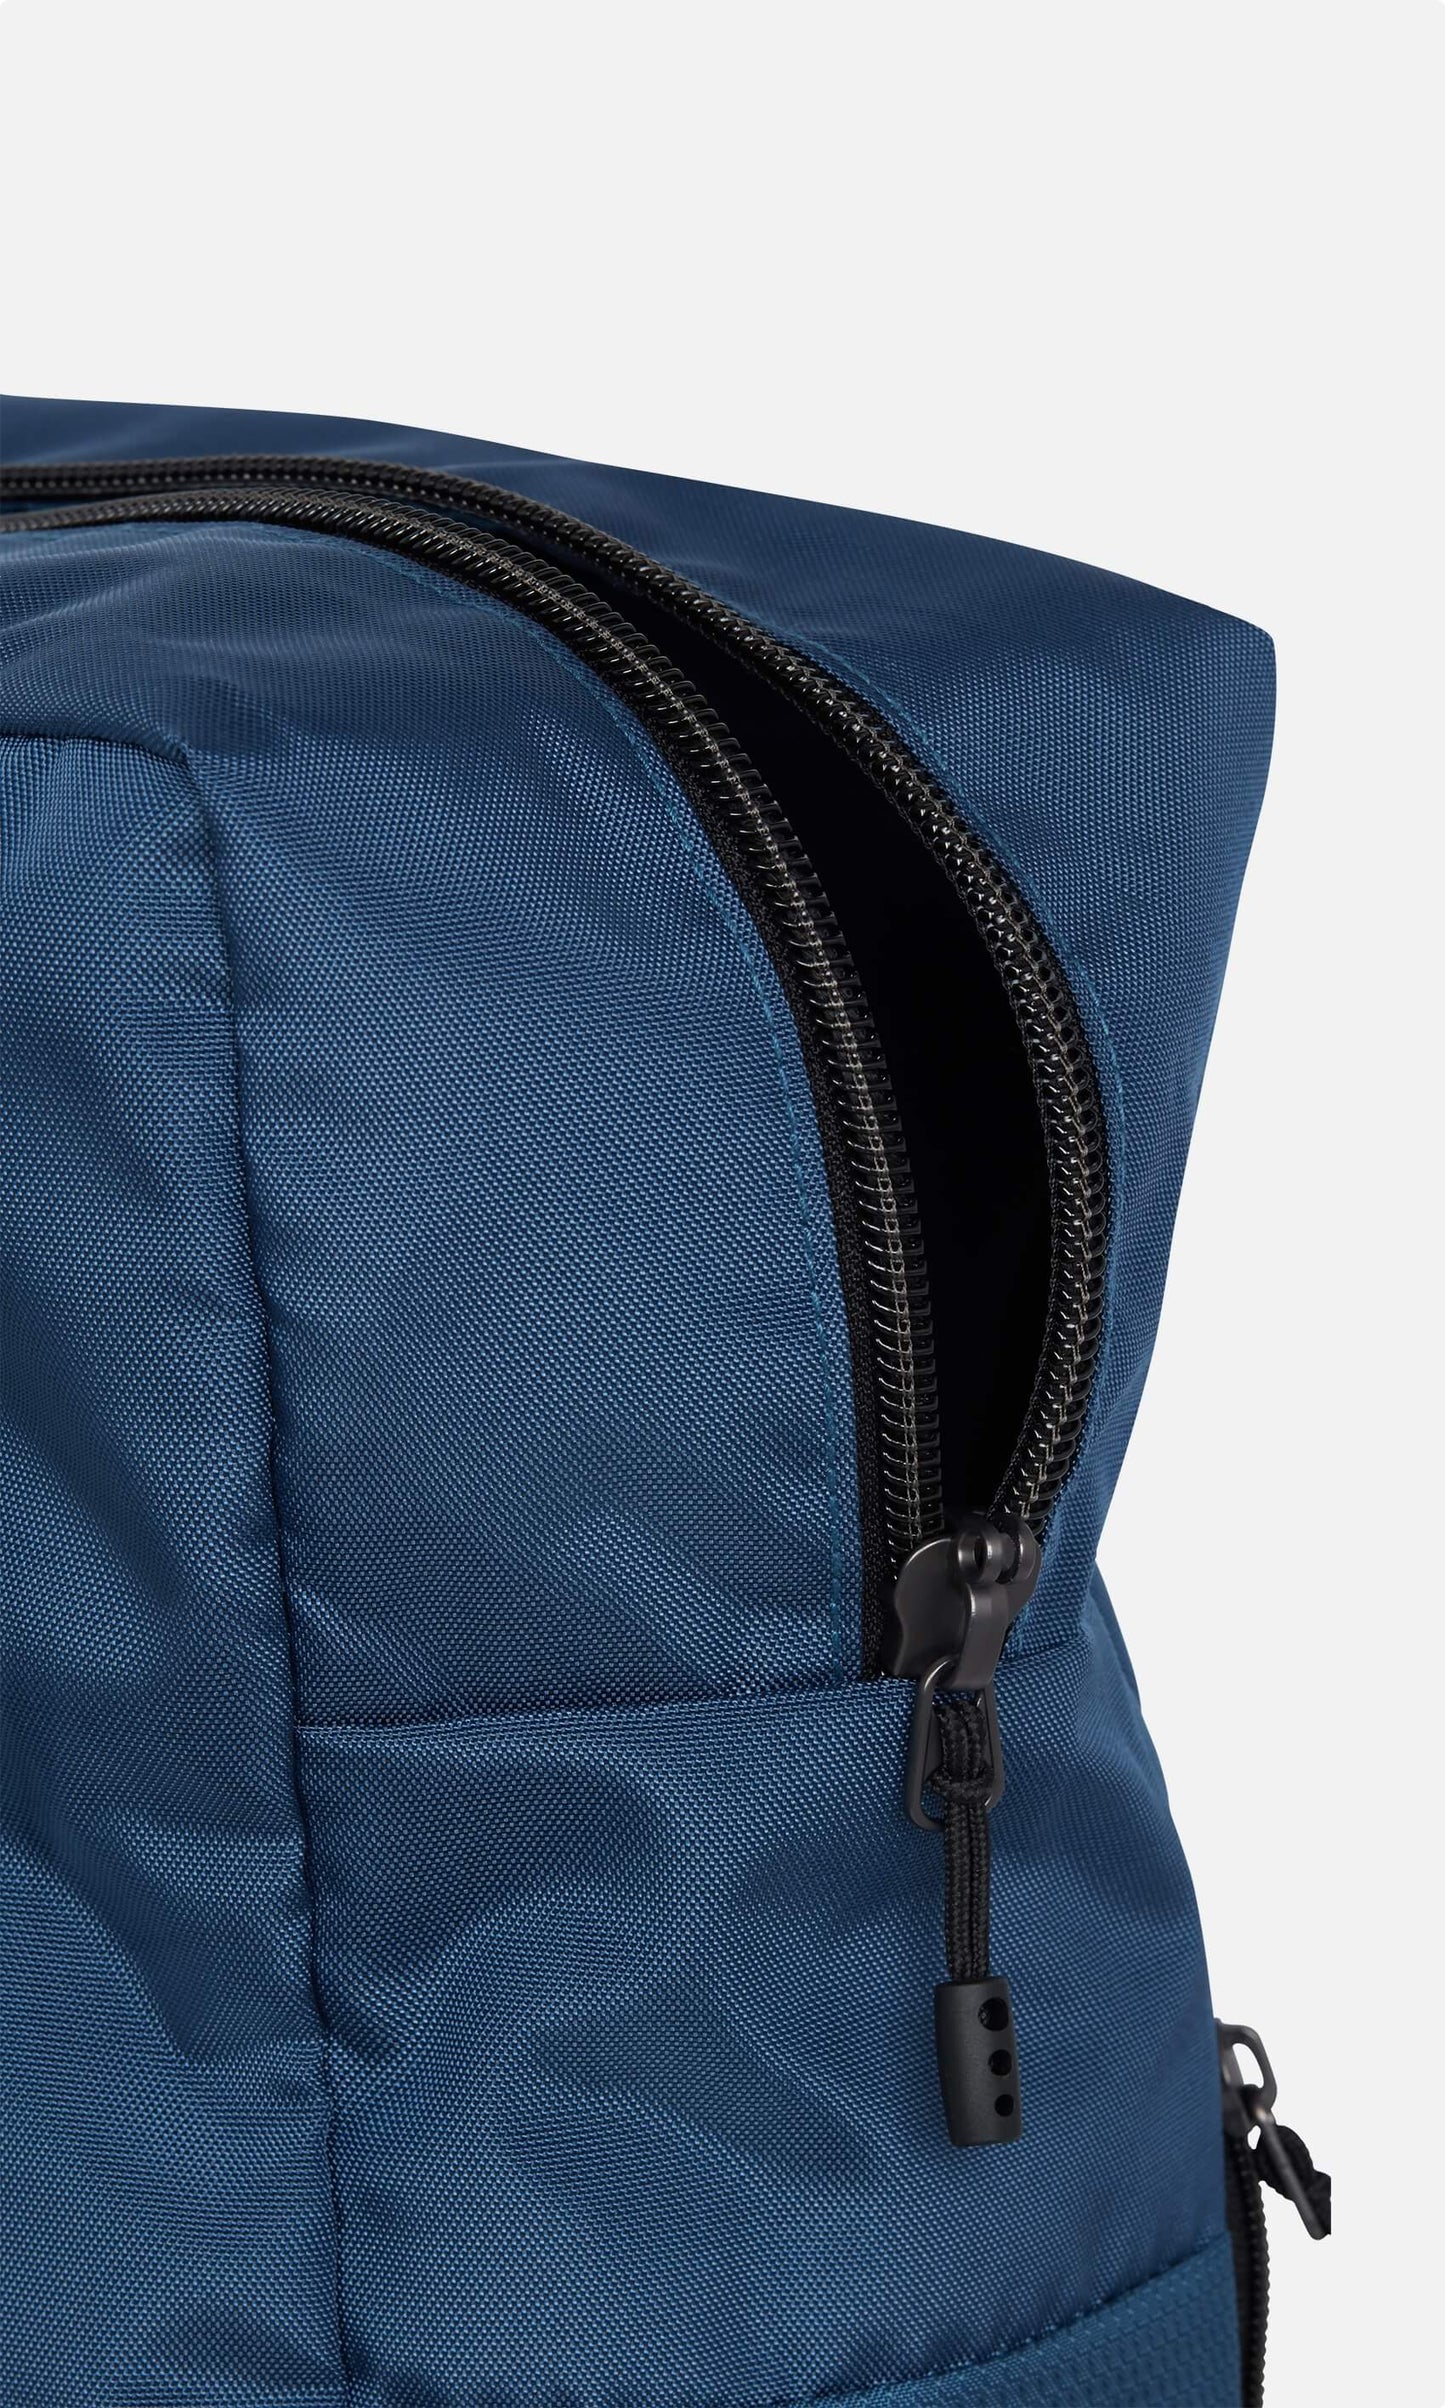 Bamburgh roll top backpack in navy